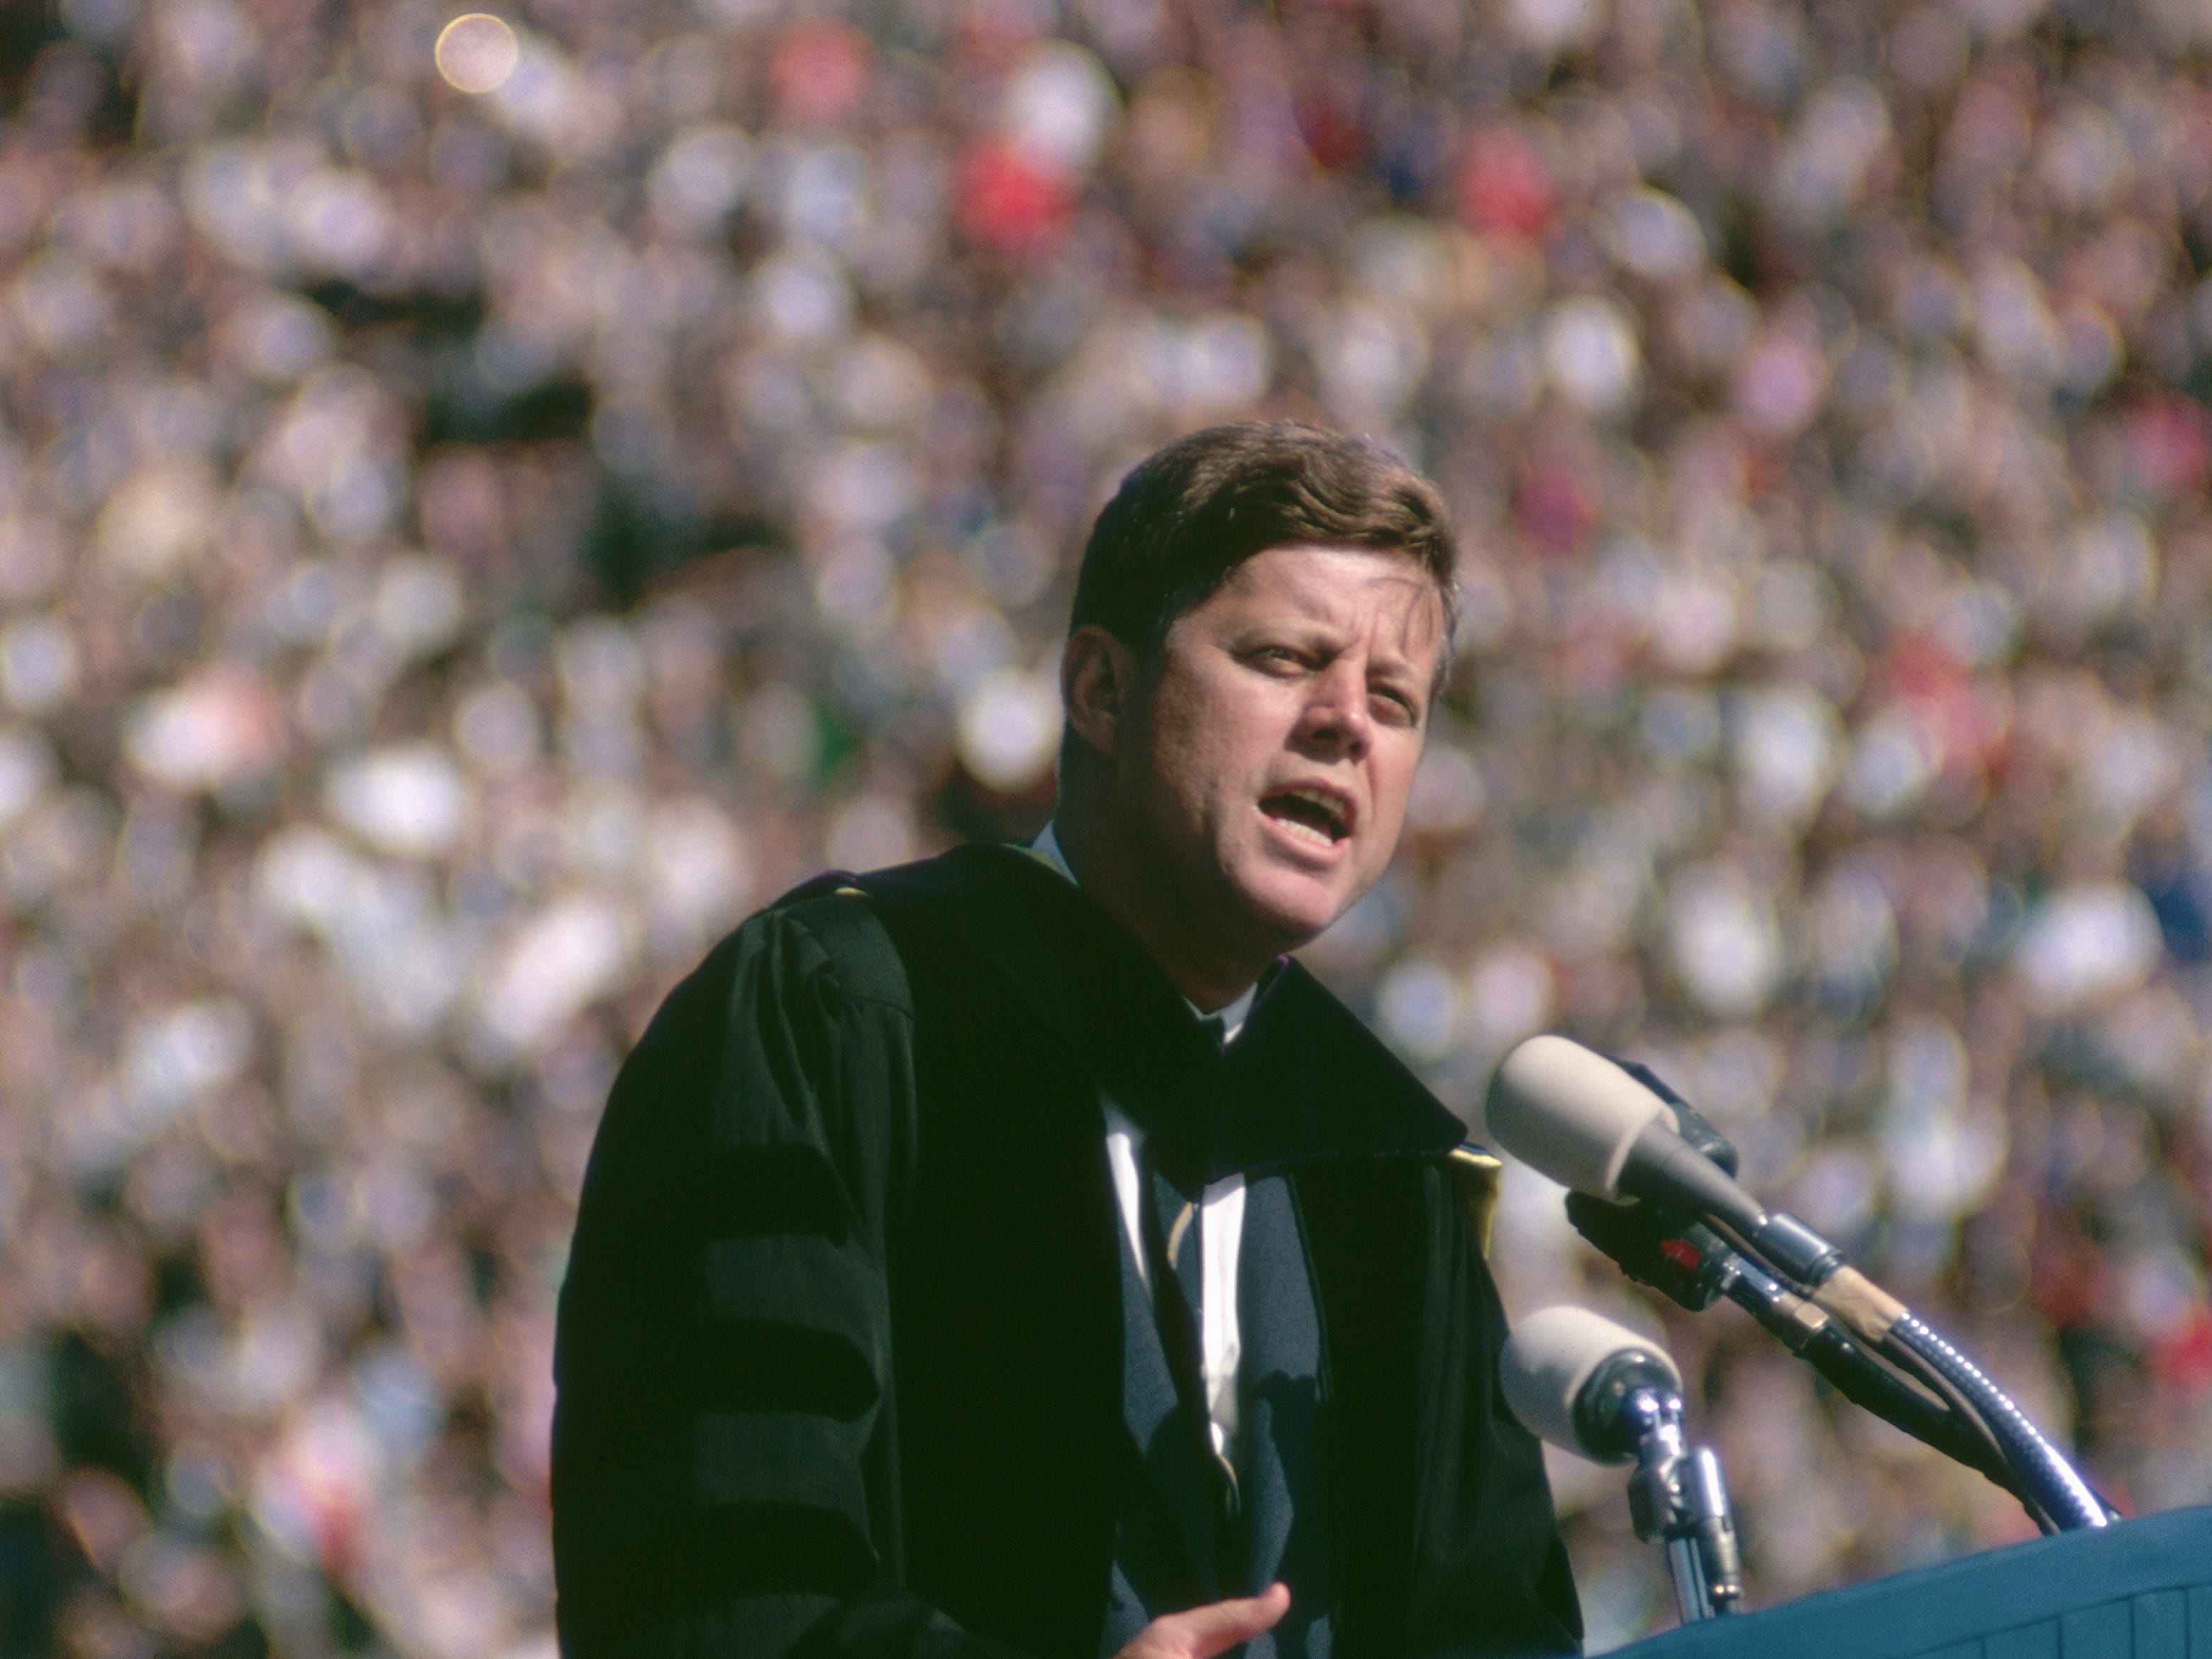 <p>Against the tumult of the early '60s, <a href="https://www.businessinsider.com/photos-show-daily-life-in-john-f-kennedys-white-house-2023-3">John F. Kennedy</a> inspired graduates to strive for what may be the biggest goal of them all: world peace.</p><p>"Too many of us think it is impossible," he said. "Too many think it unreal. But that is a dangerous, defeatist belief. It leads to the conclusion that war is inevitable — that mankind is doomed — that we are gripped by forces we cannot control."</p><p>Our job is not to accept that, he urged. "Our problems are manmade — therefore, they can be solved by man. And man can be as big as he wants." </p>